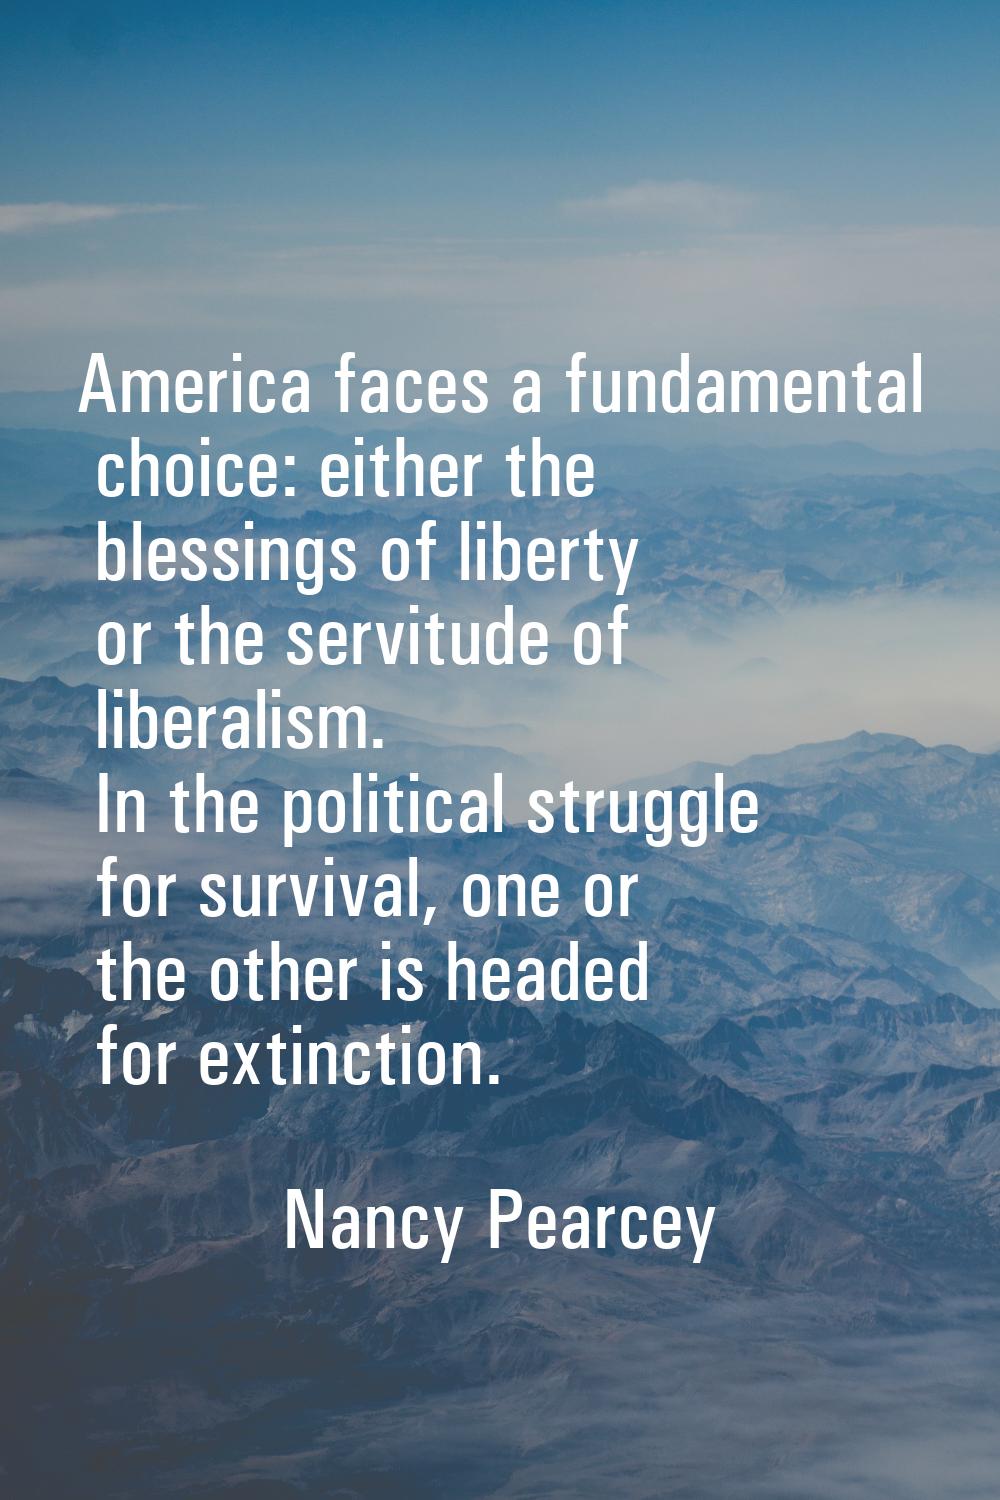 America faces a fundamental choice: either the blessings of liberty or the servitude of liberalism.